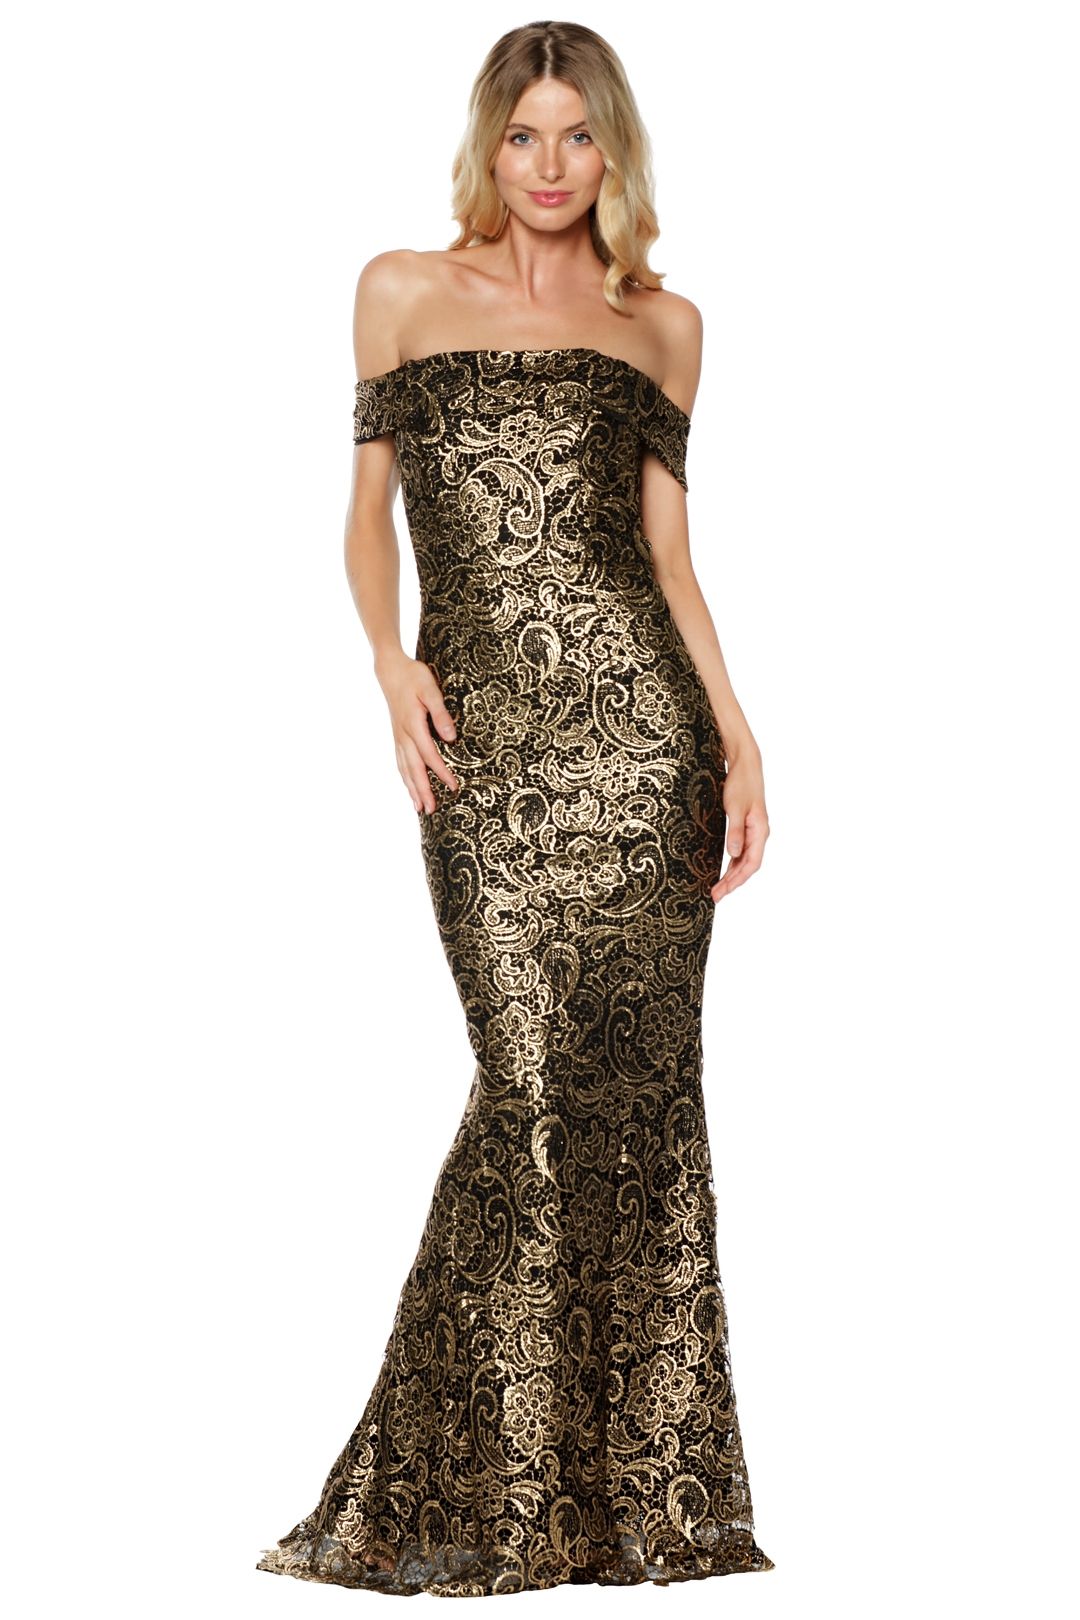 Grace and Hart - Gold Rush Off the Shoulder Gown - Gold - Front